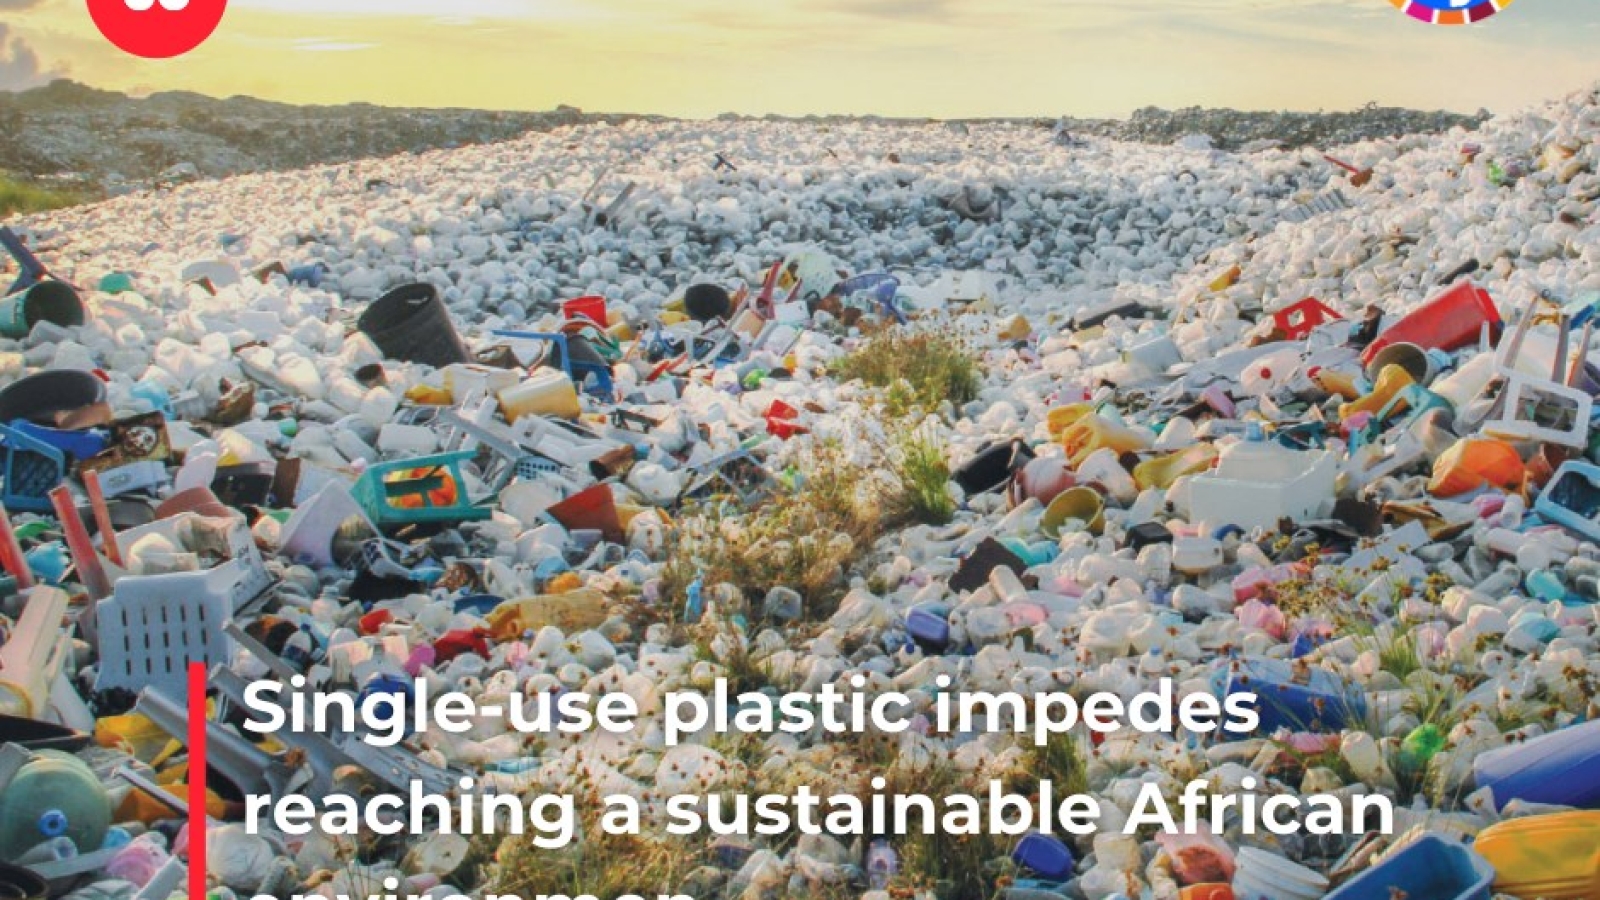 Single-use plastic impedes reaching a sustainable African environment2